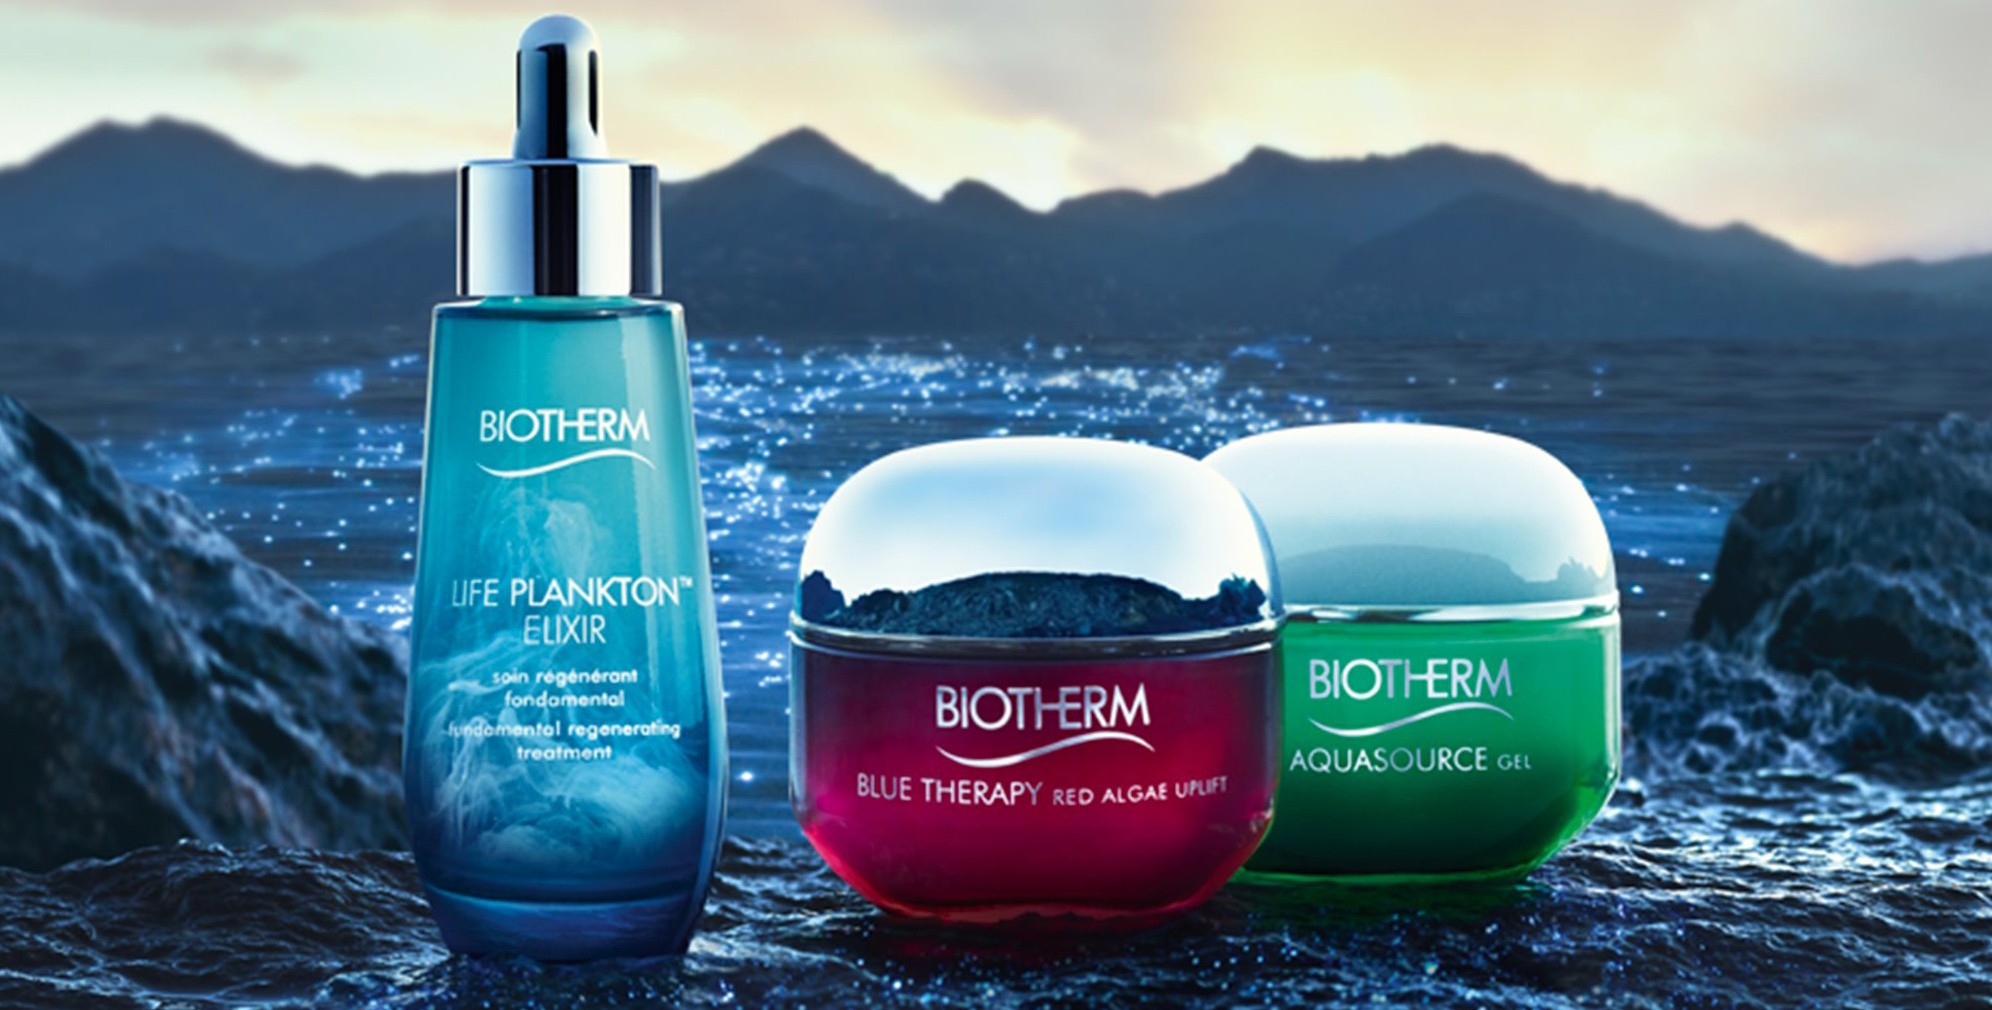 NEW BLUE THERAPY RED ALGAE UPLIFT